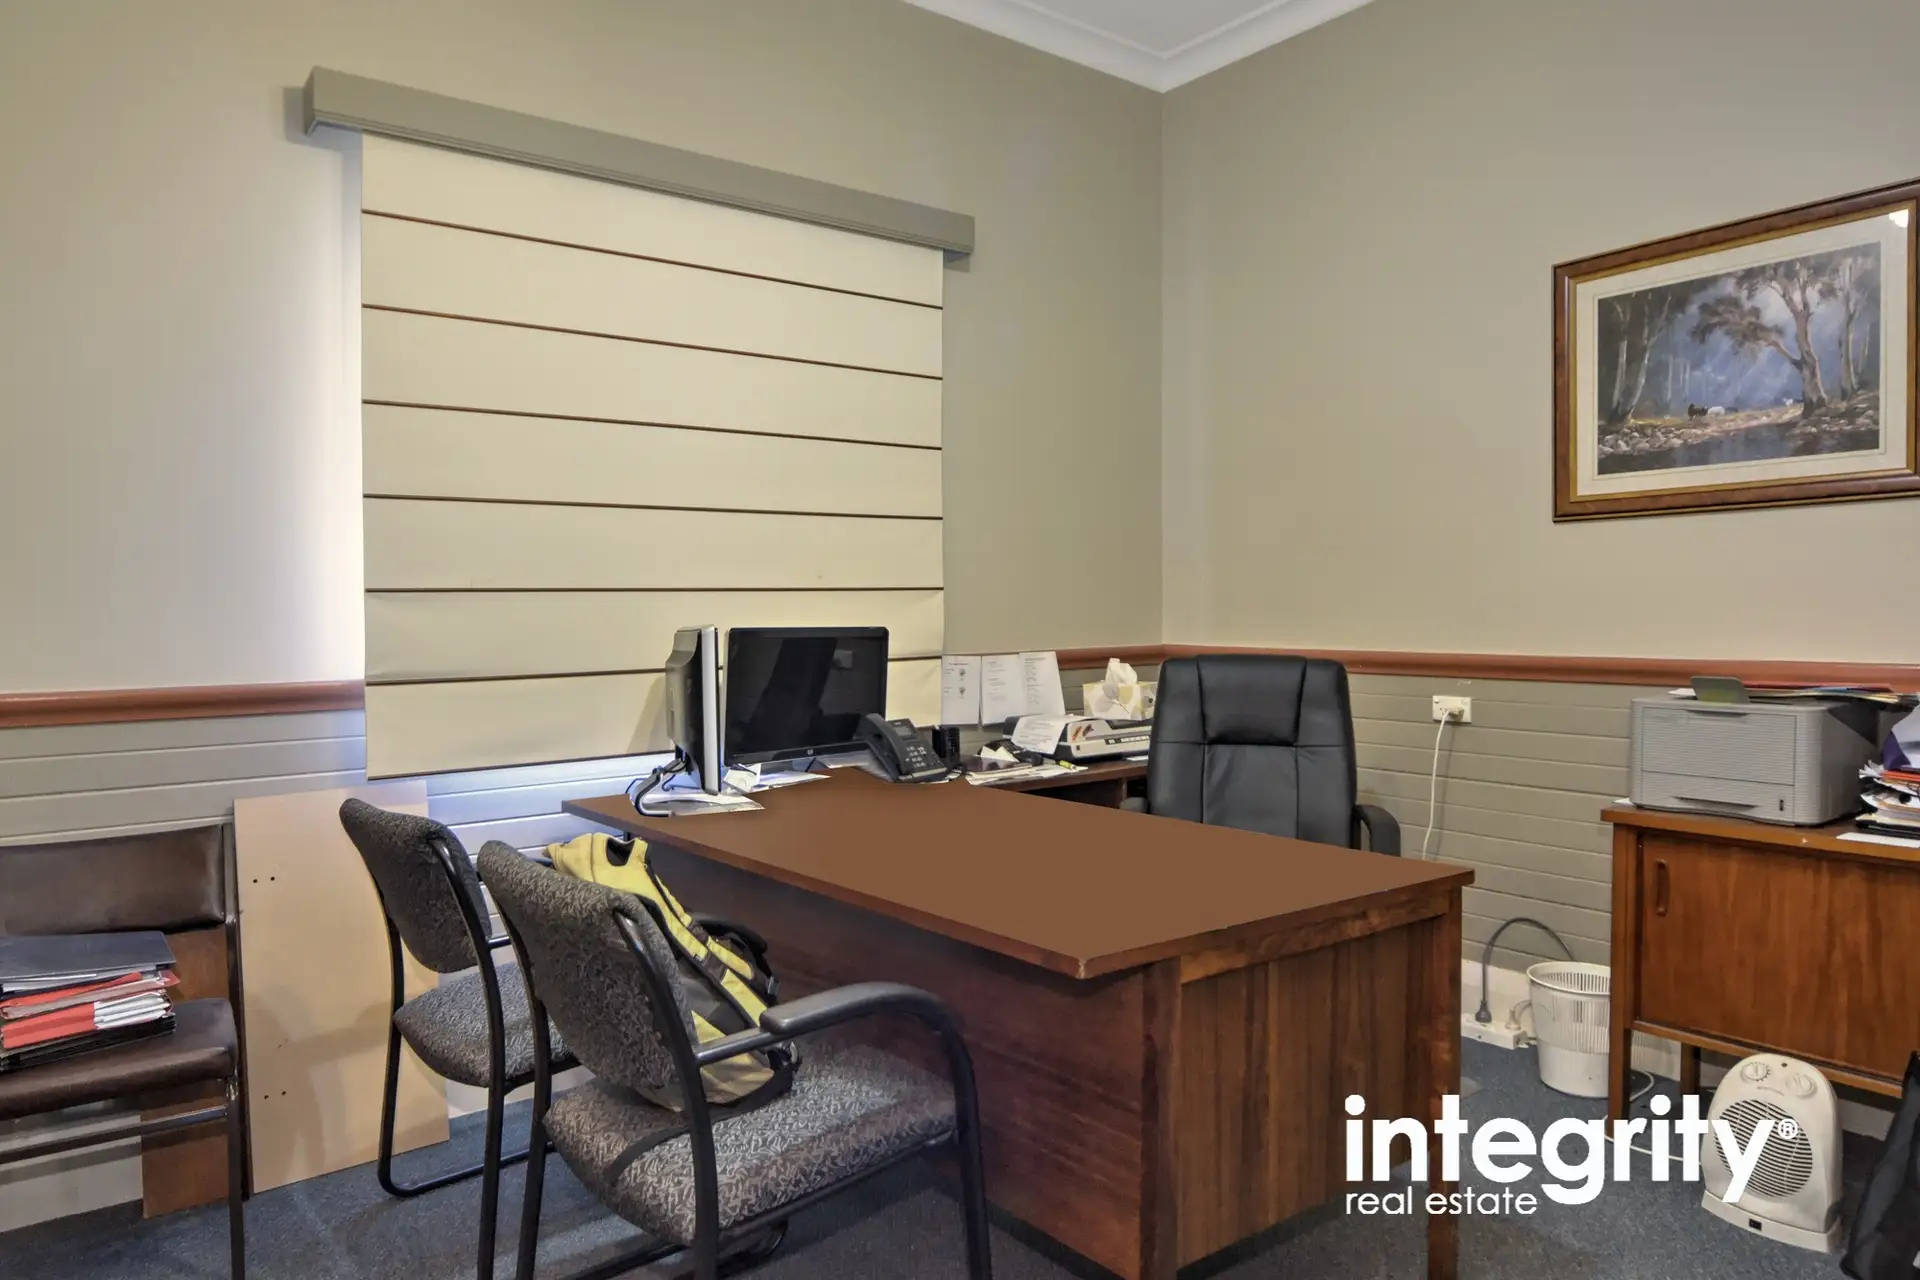 71 Plunkett Street, Nowra For Sale by Integrity Real Estate - image 6